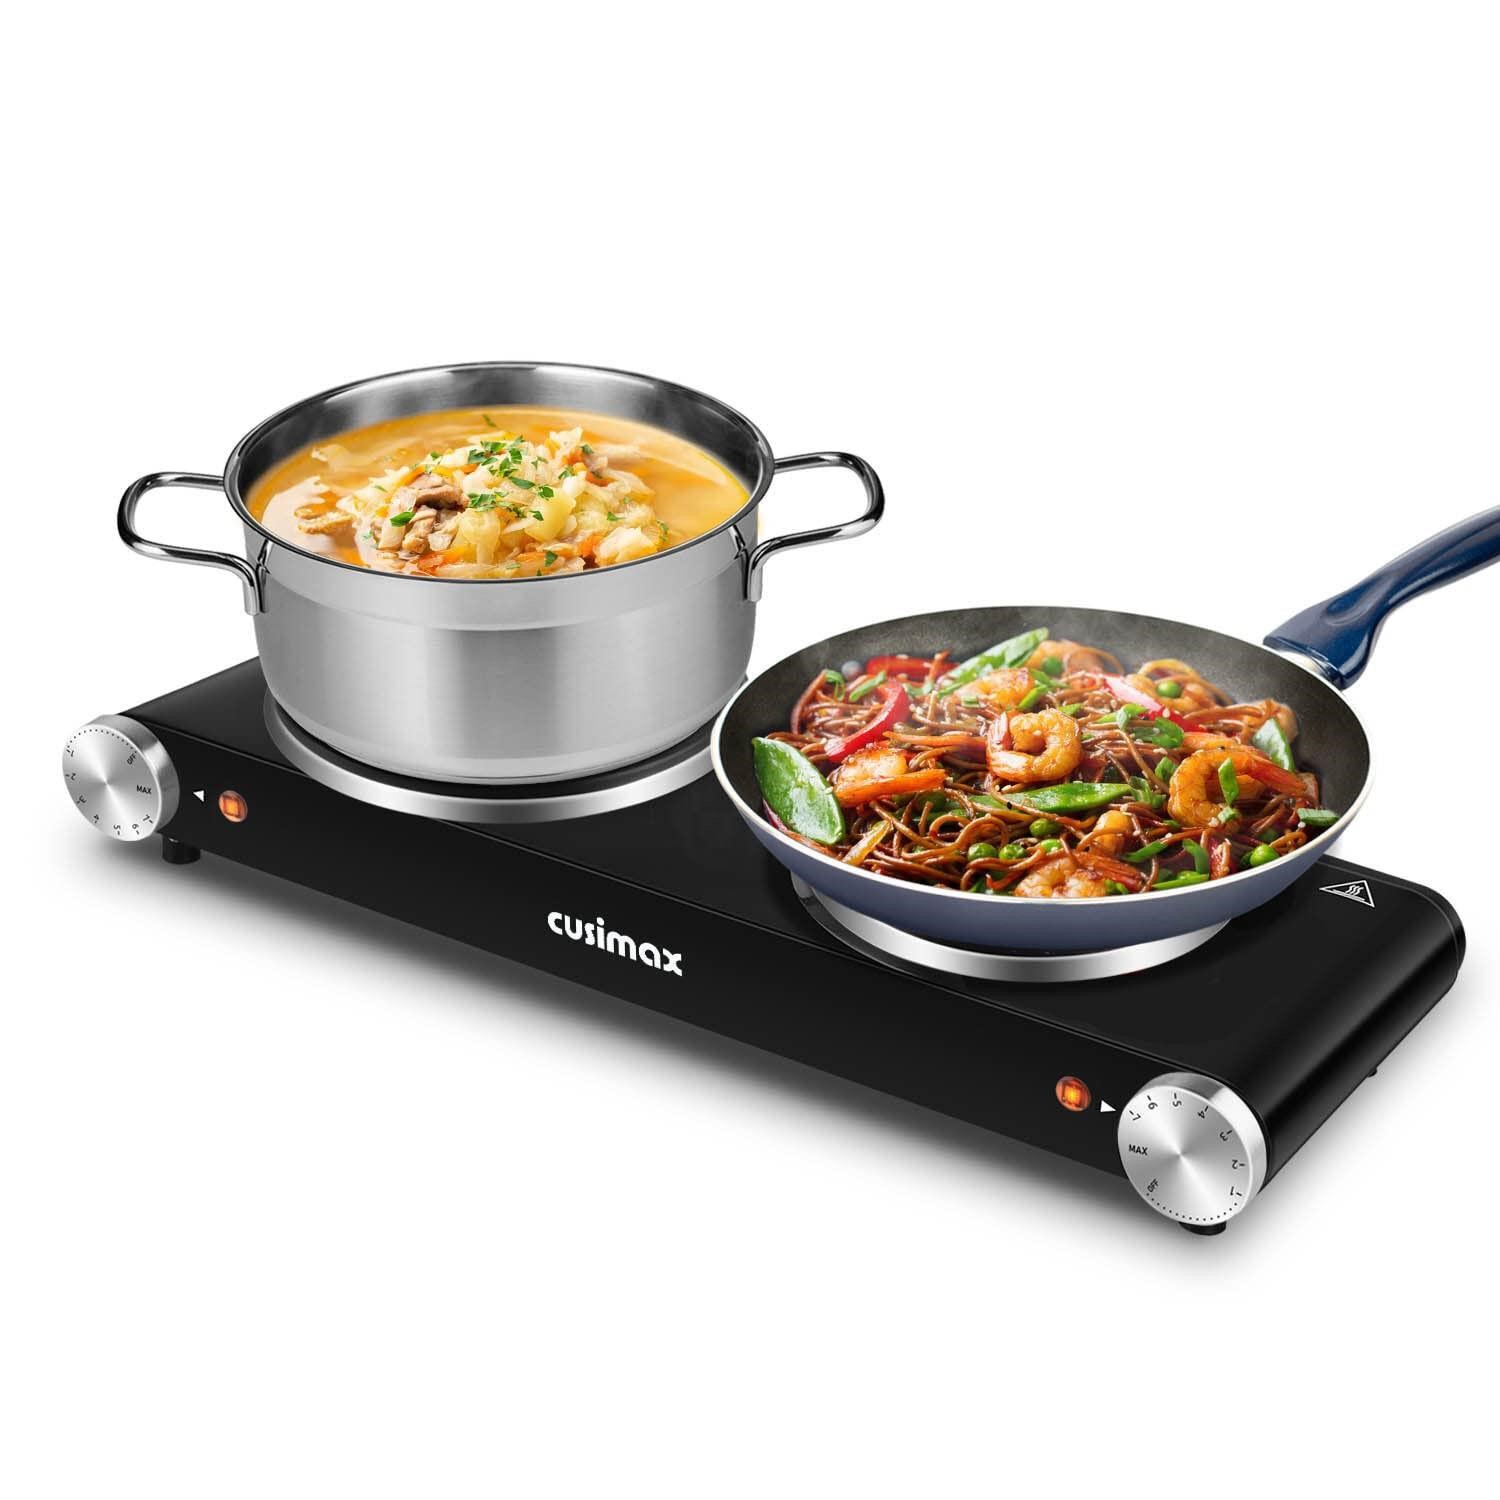 Cusimax Hot Plate for Cooking 1800W Portable Elect